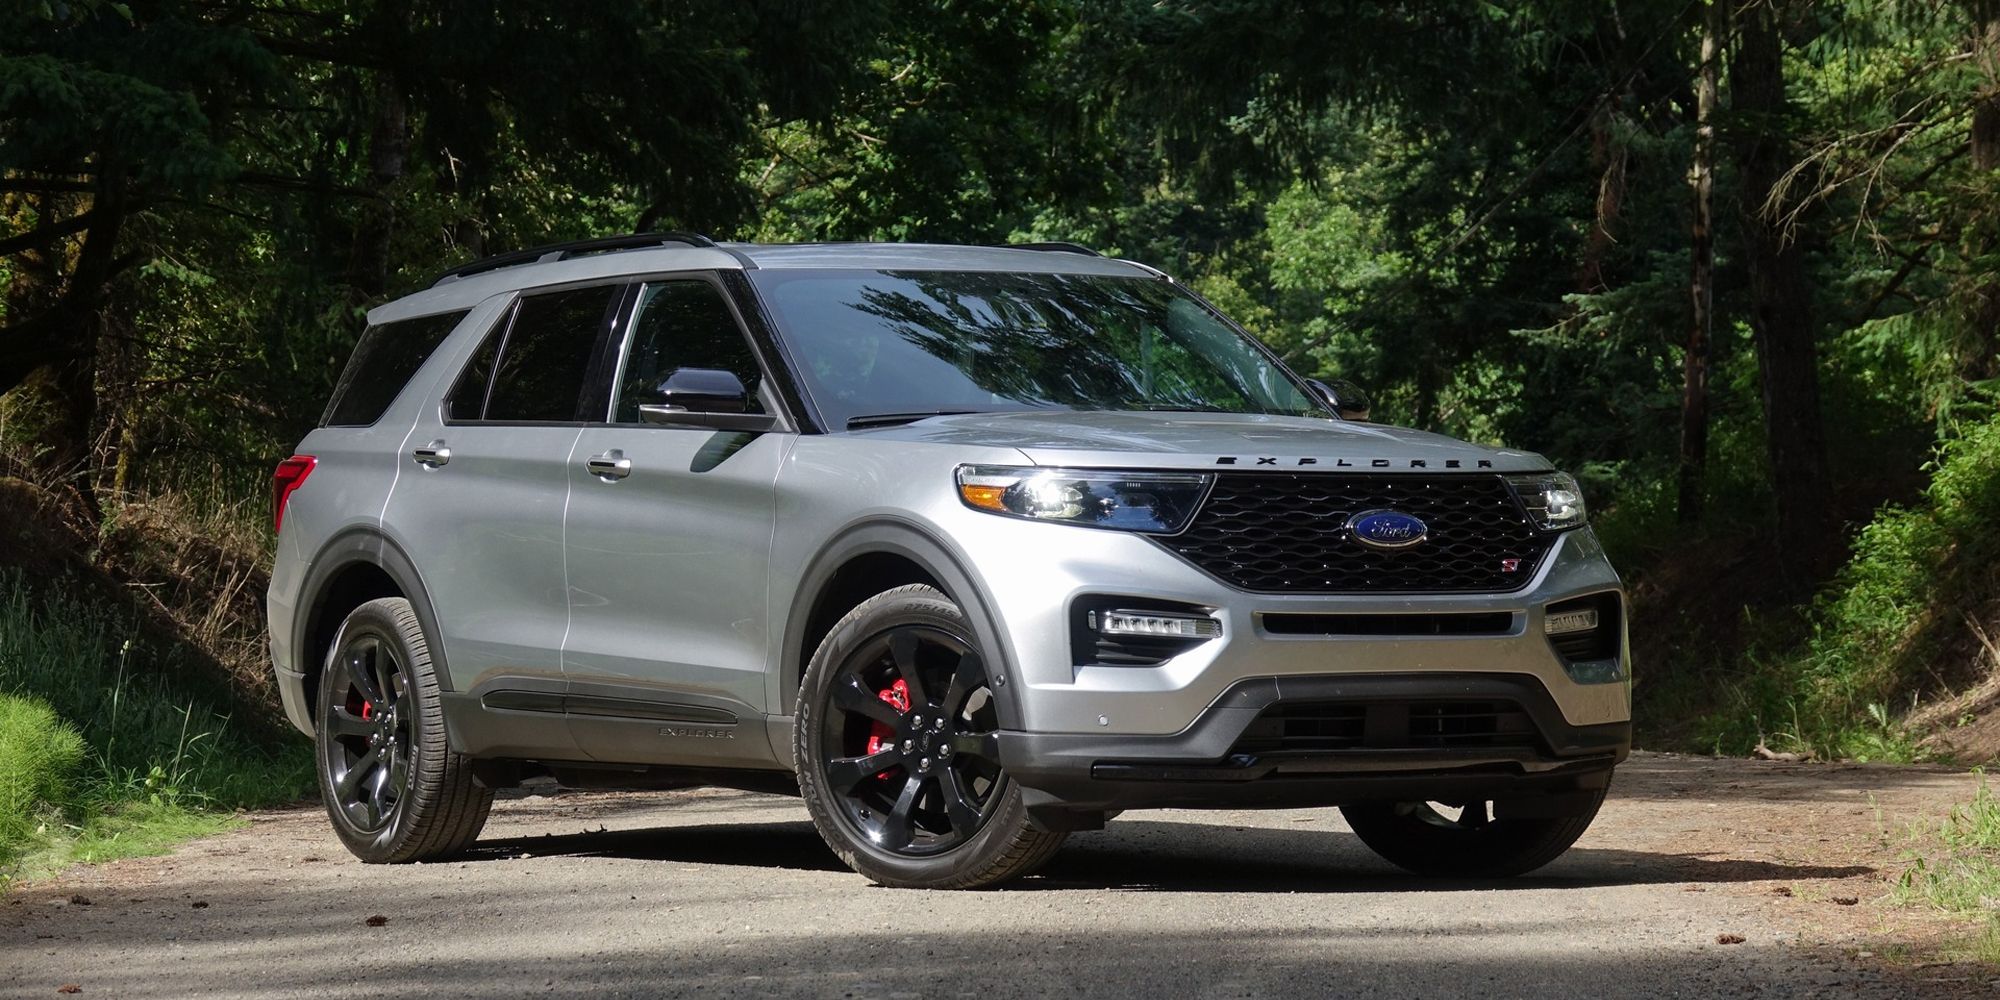 Ford Explorer ST: What You Need To Know Before Buying A New Model